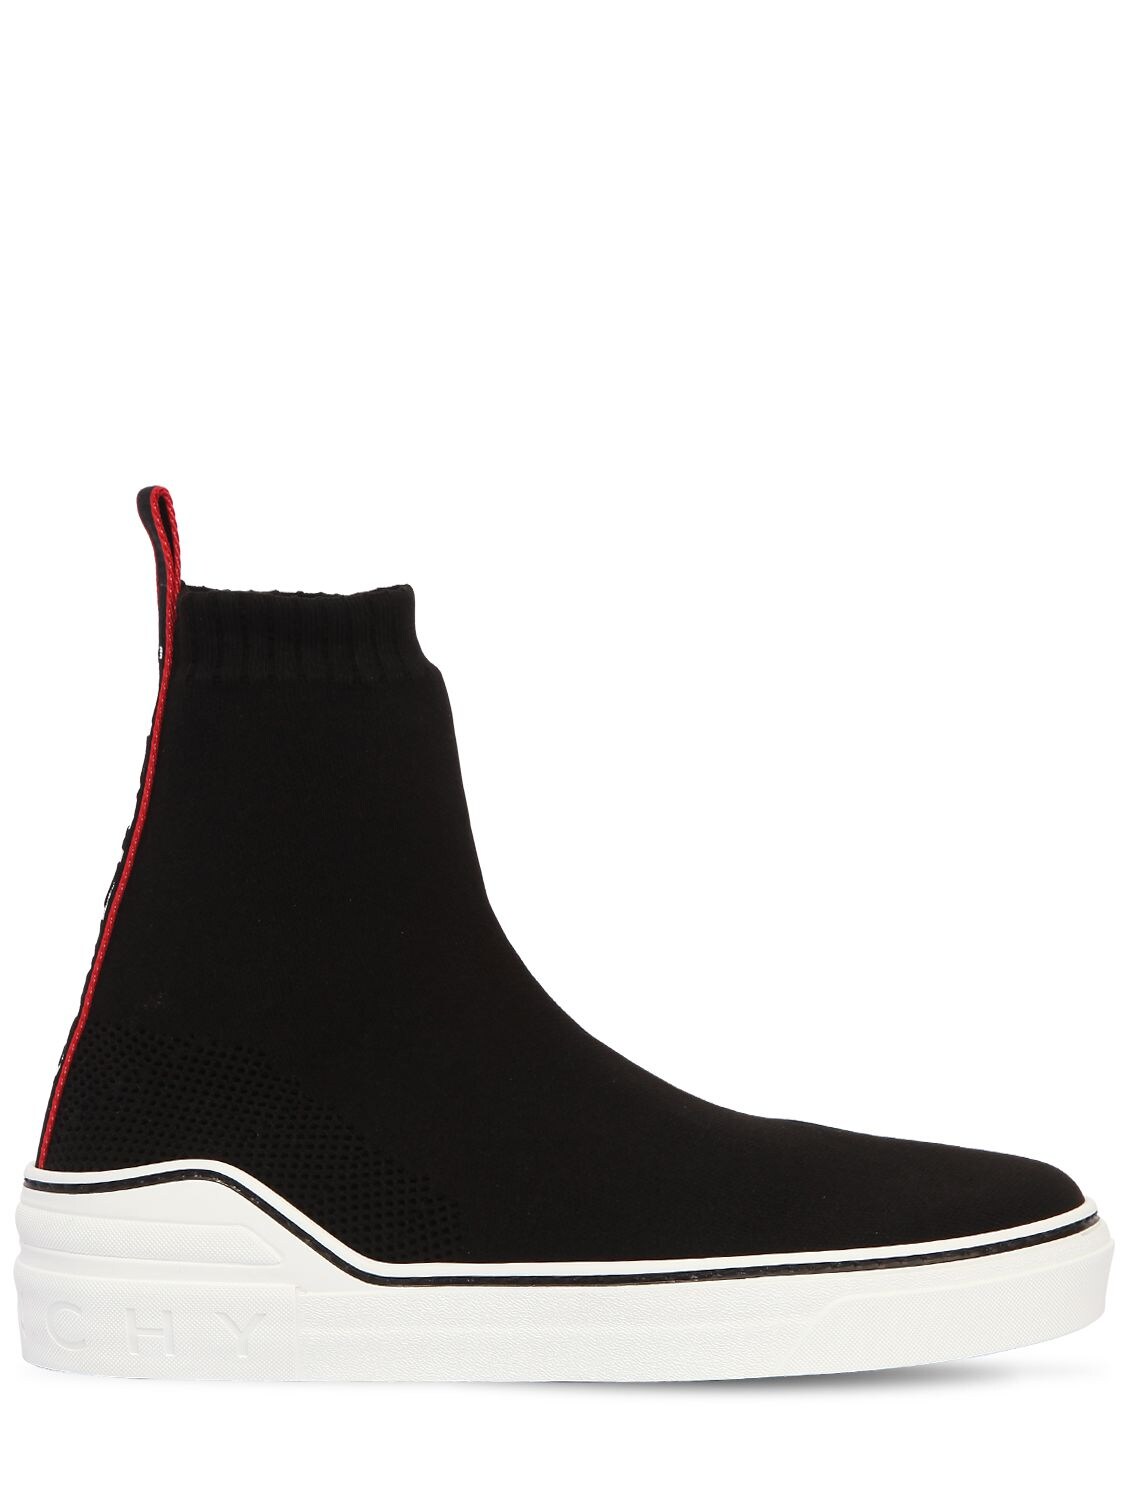 givenchy men's george v knit sneakers